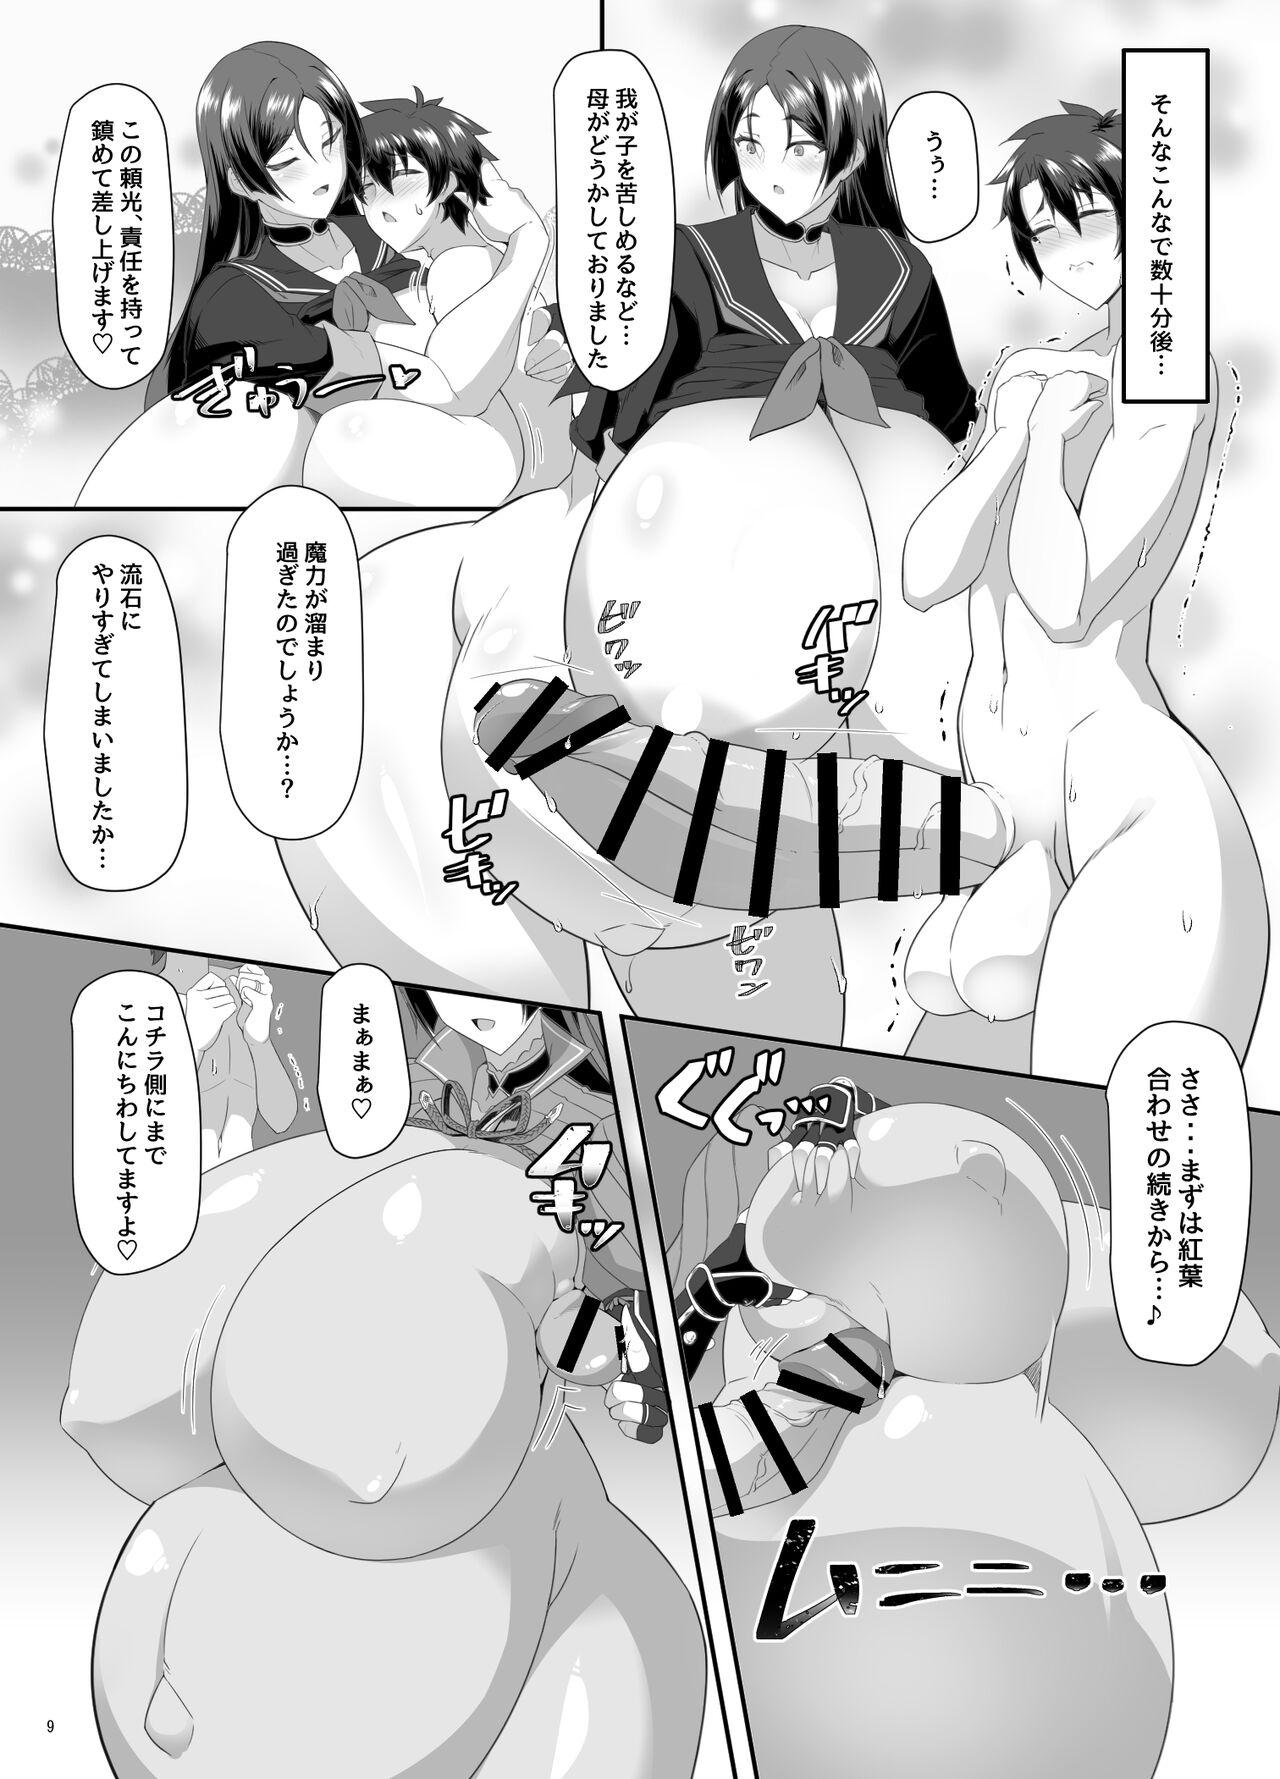 Dildo 丑母と瞳合う - Fate grand order Fat - Page 8